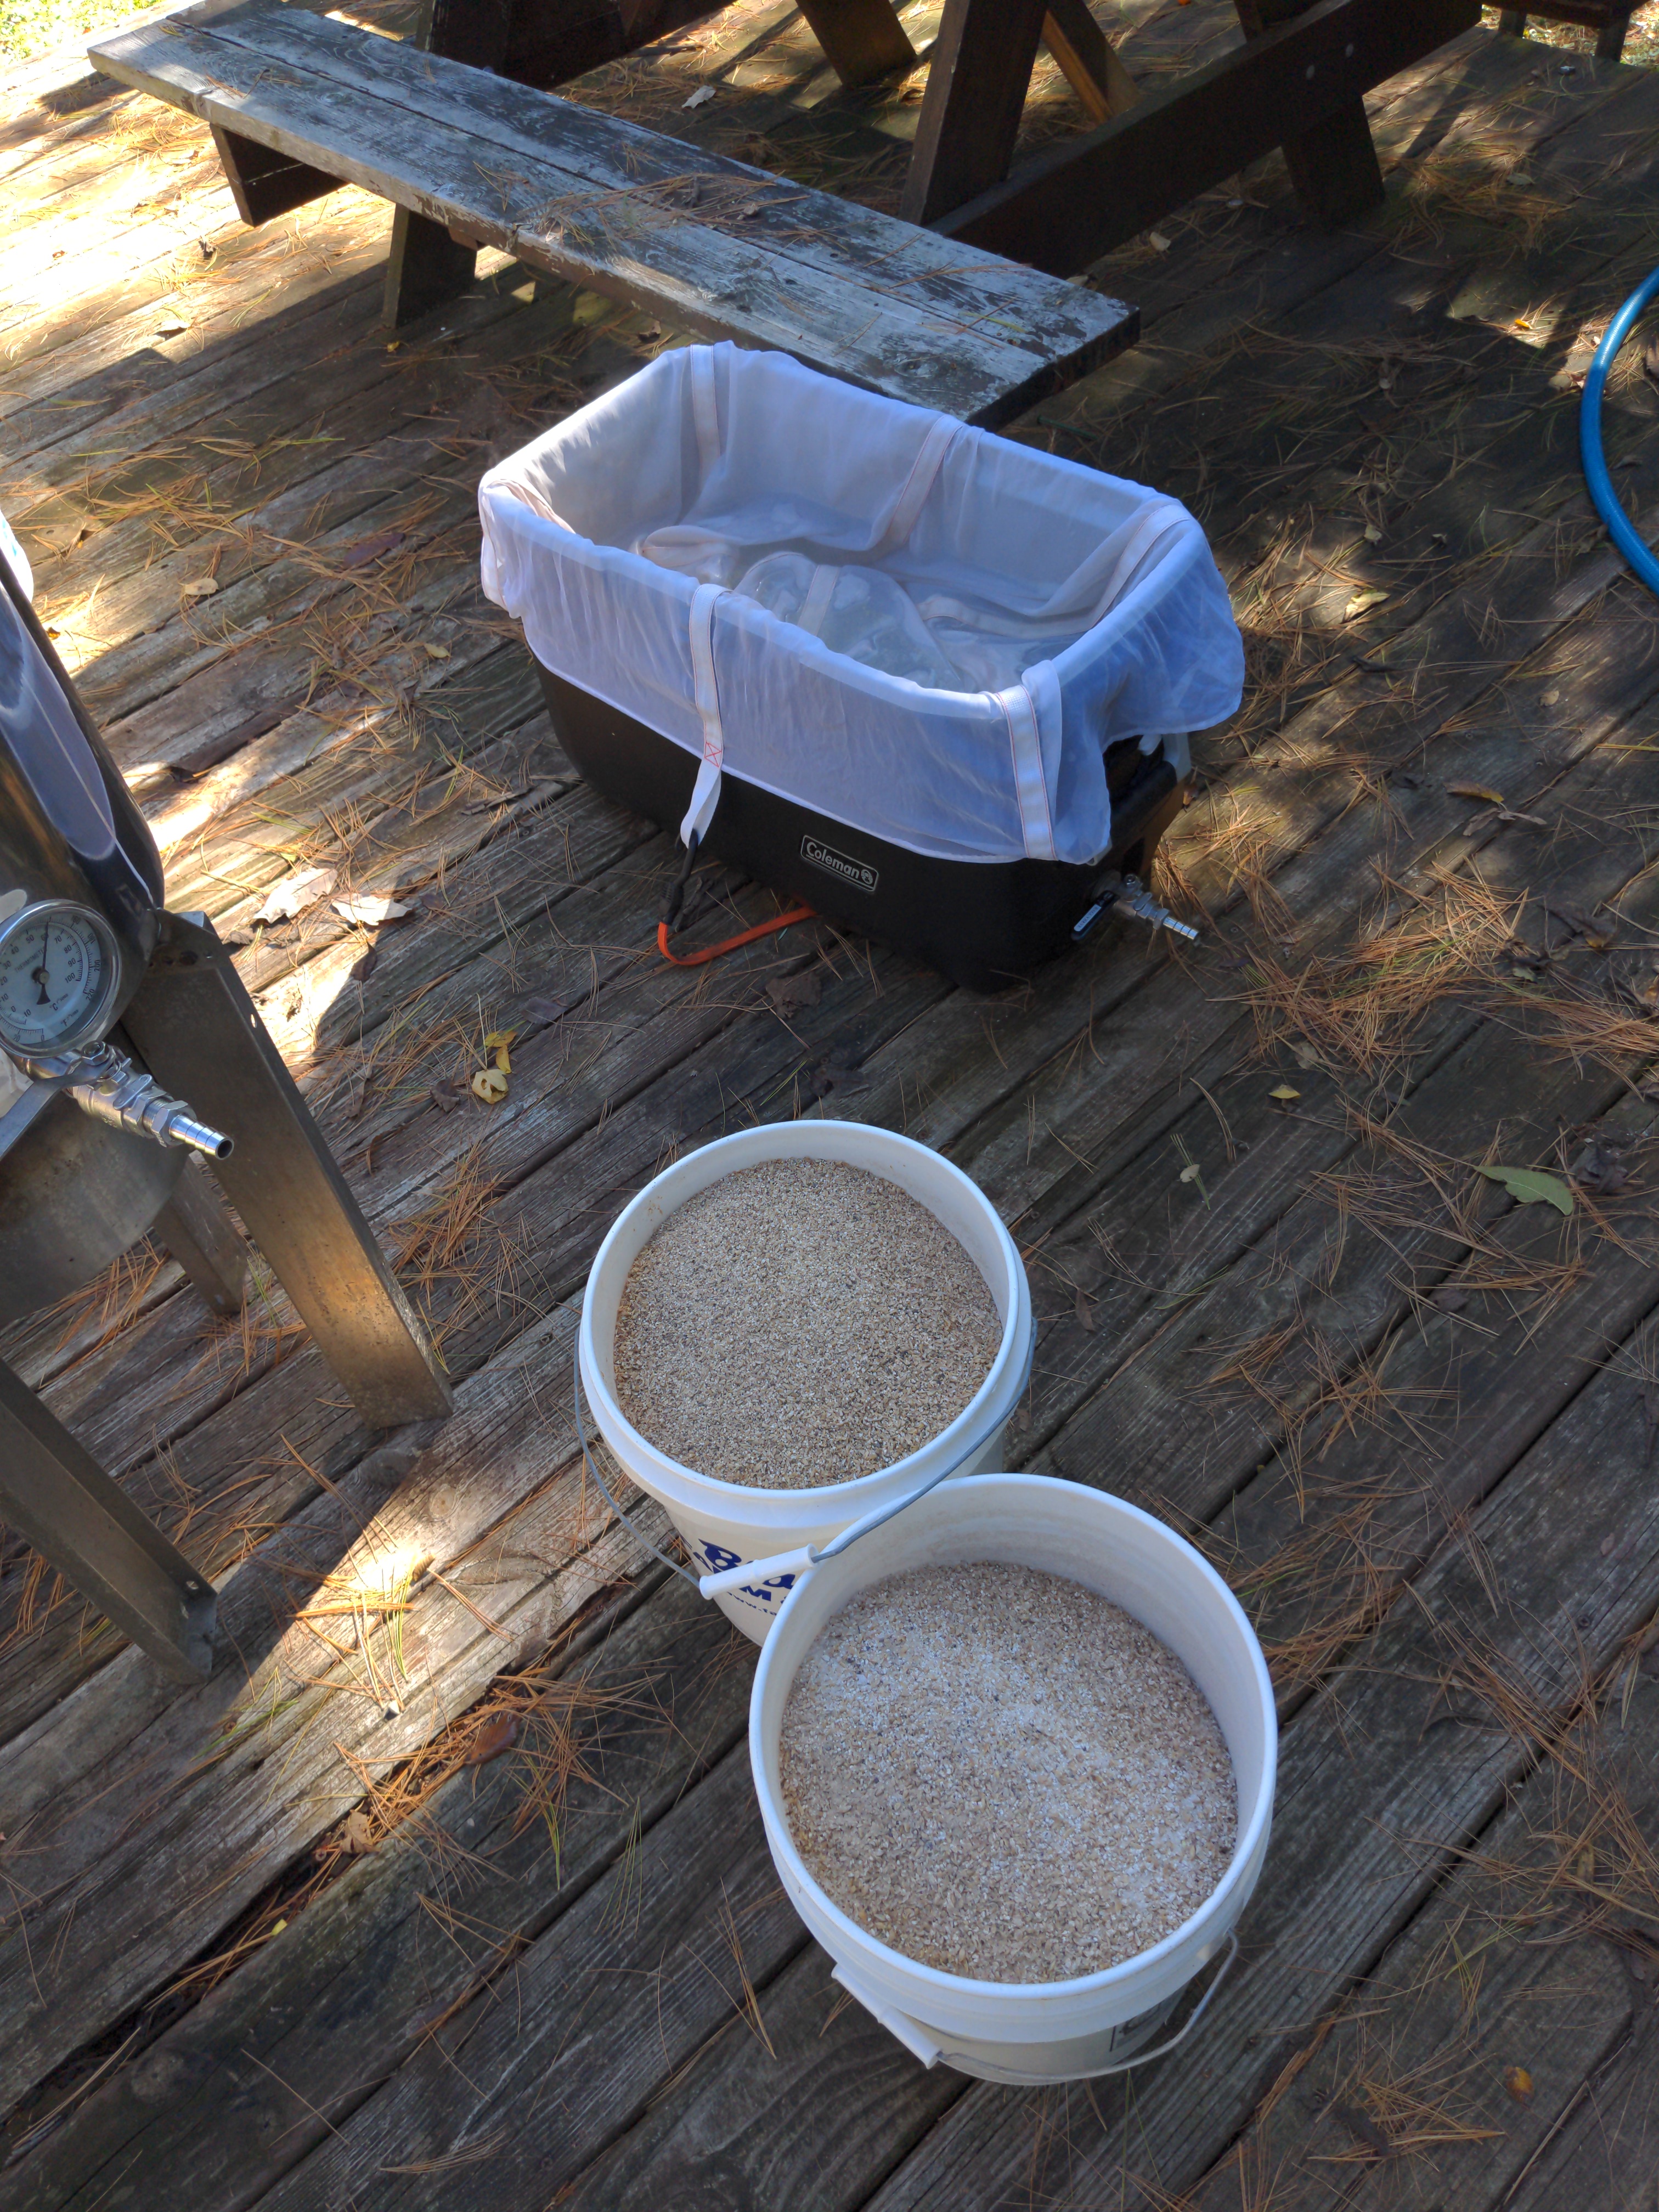 On a wooden deck, there is a simple homebrewing set up with a trashbag-lined cooler and two buckets of yeast. Photo by BUZZ Homebrew Club.